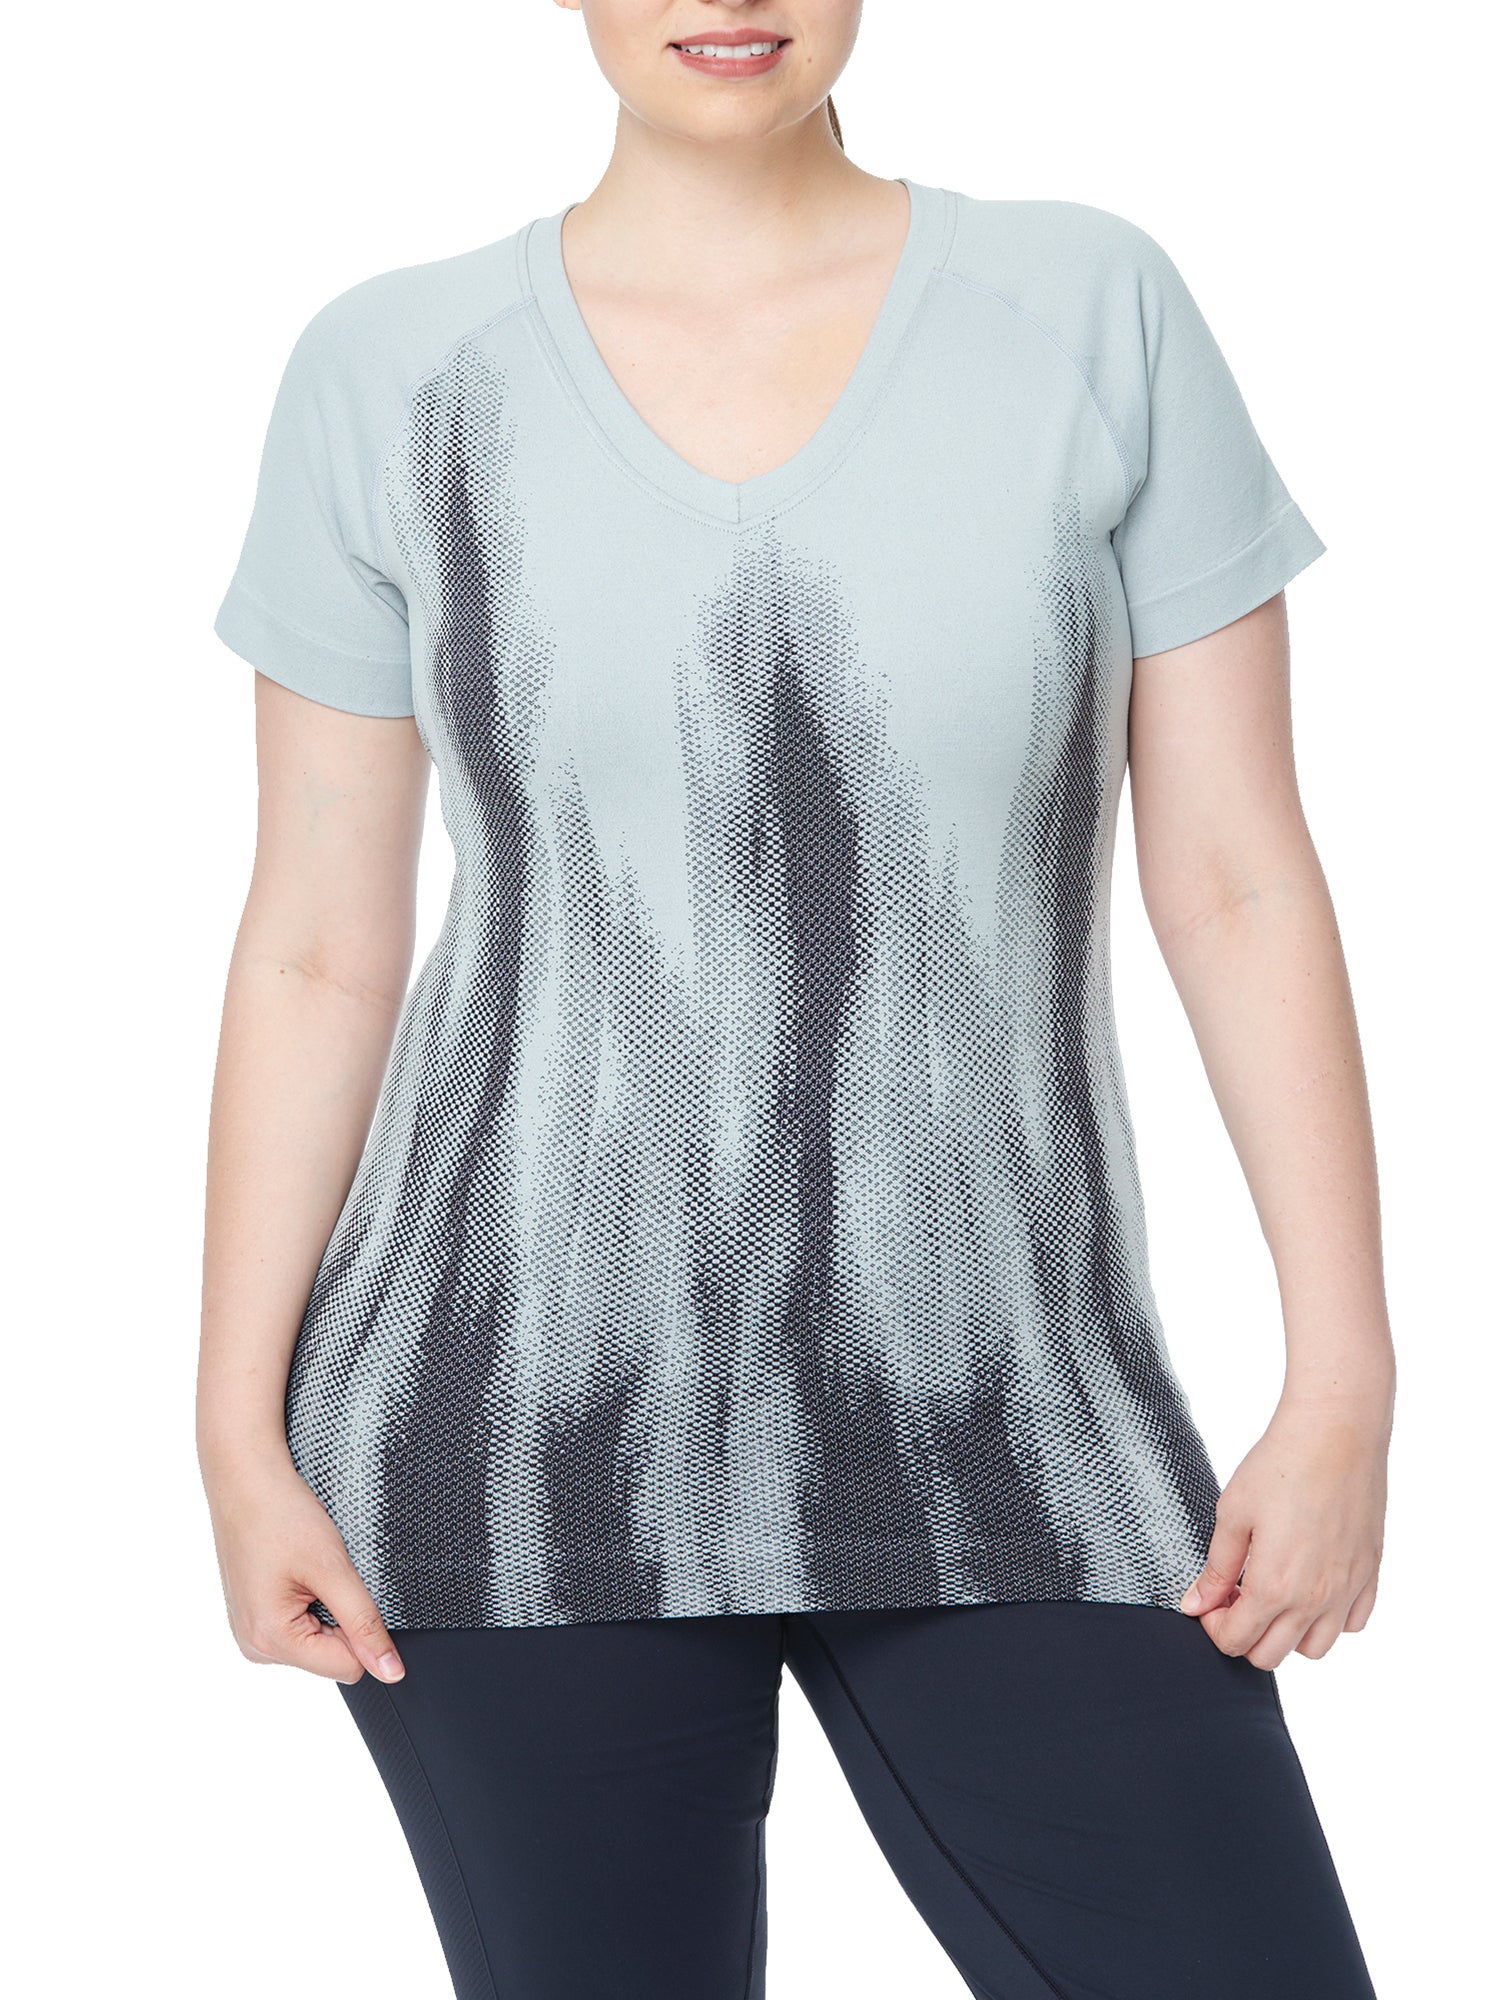 Jacquard V Neck with Raglan Sleeves Top - Under Control Collection